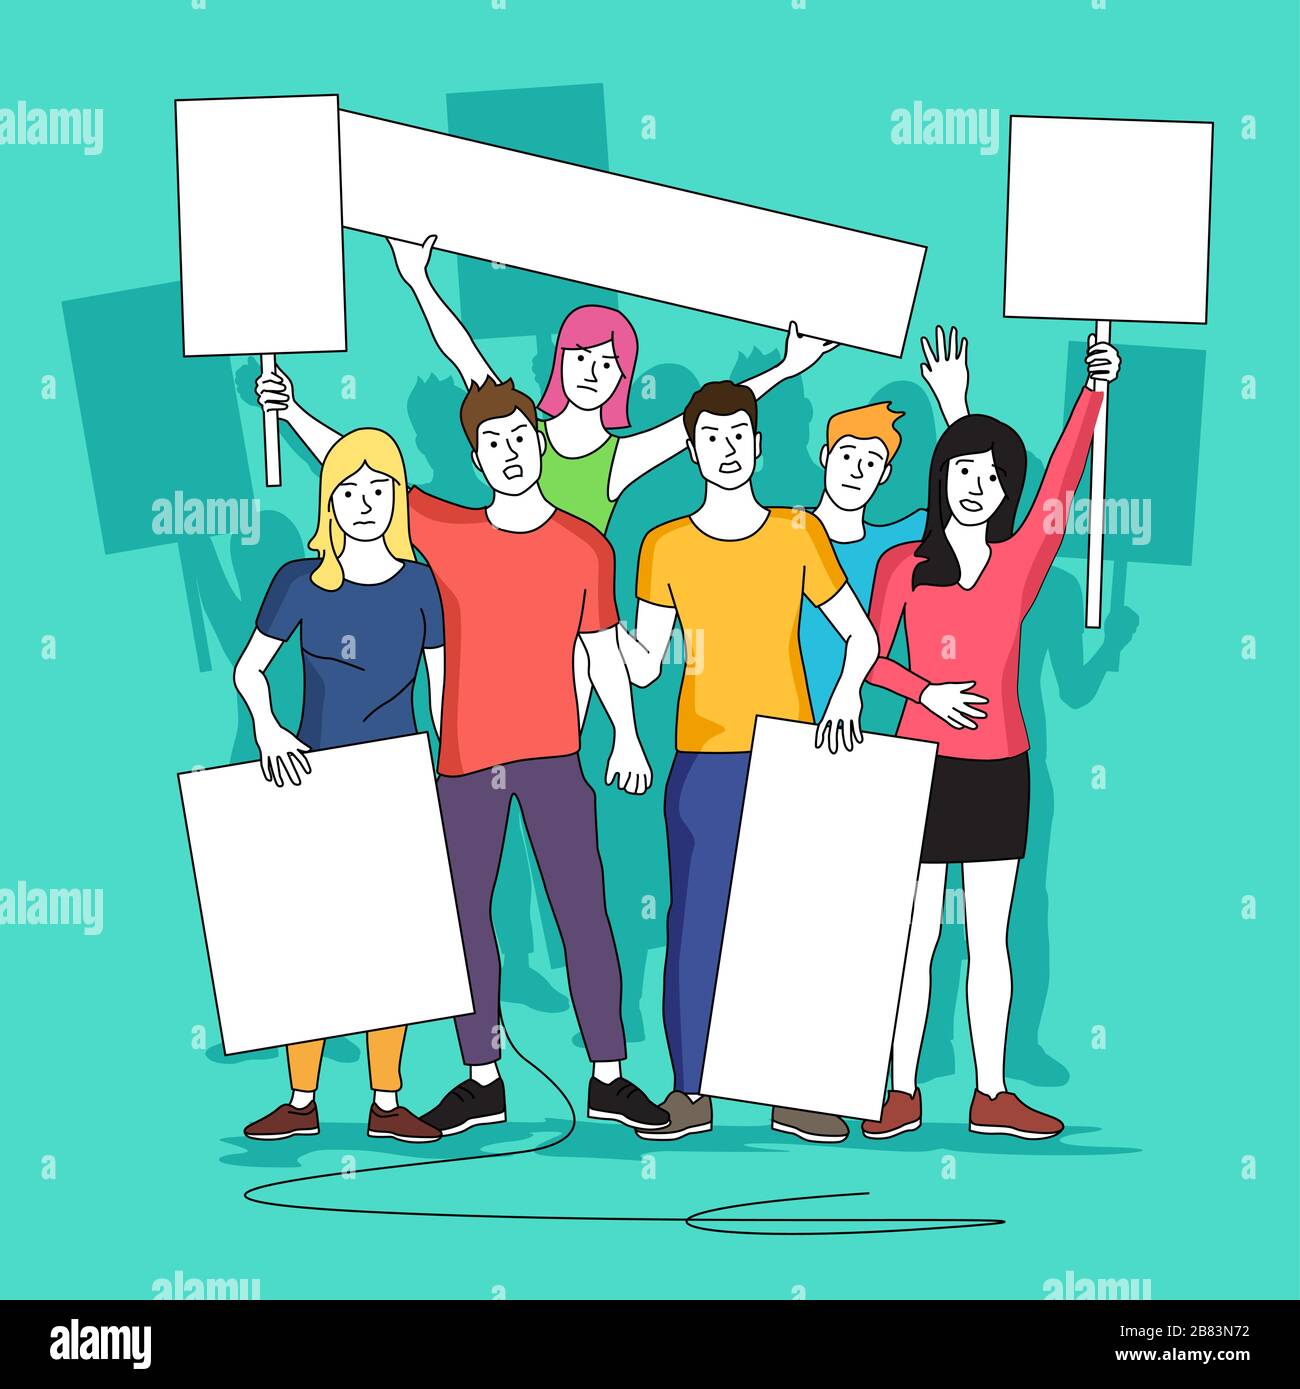 A group of protestors holing up blank signs and banners. People vector illustration. Stock Vector